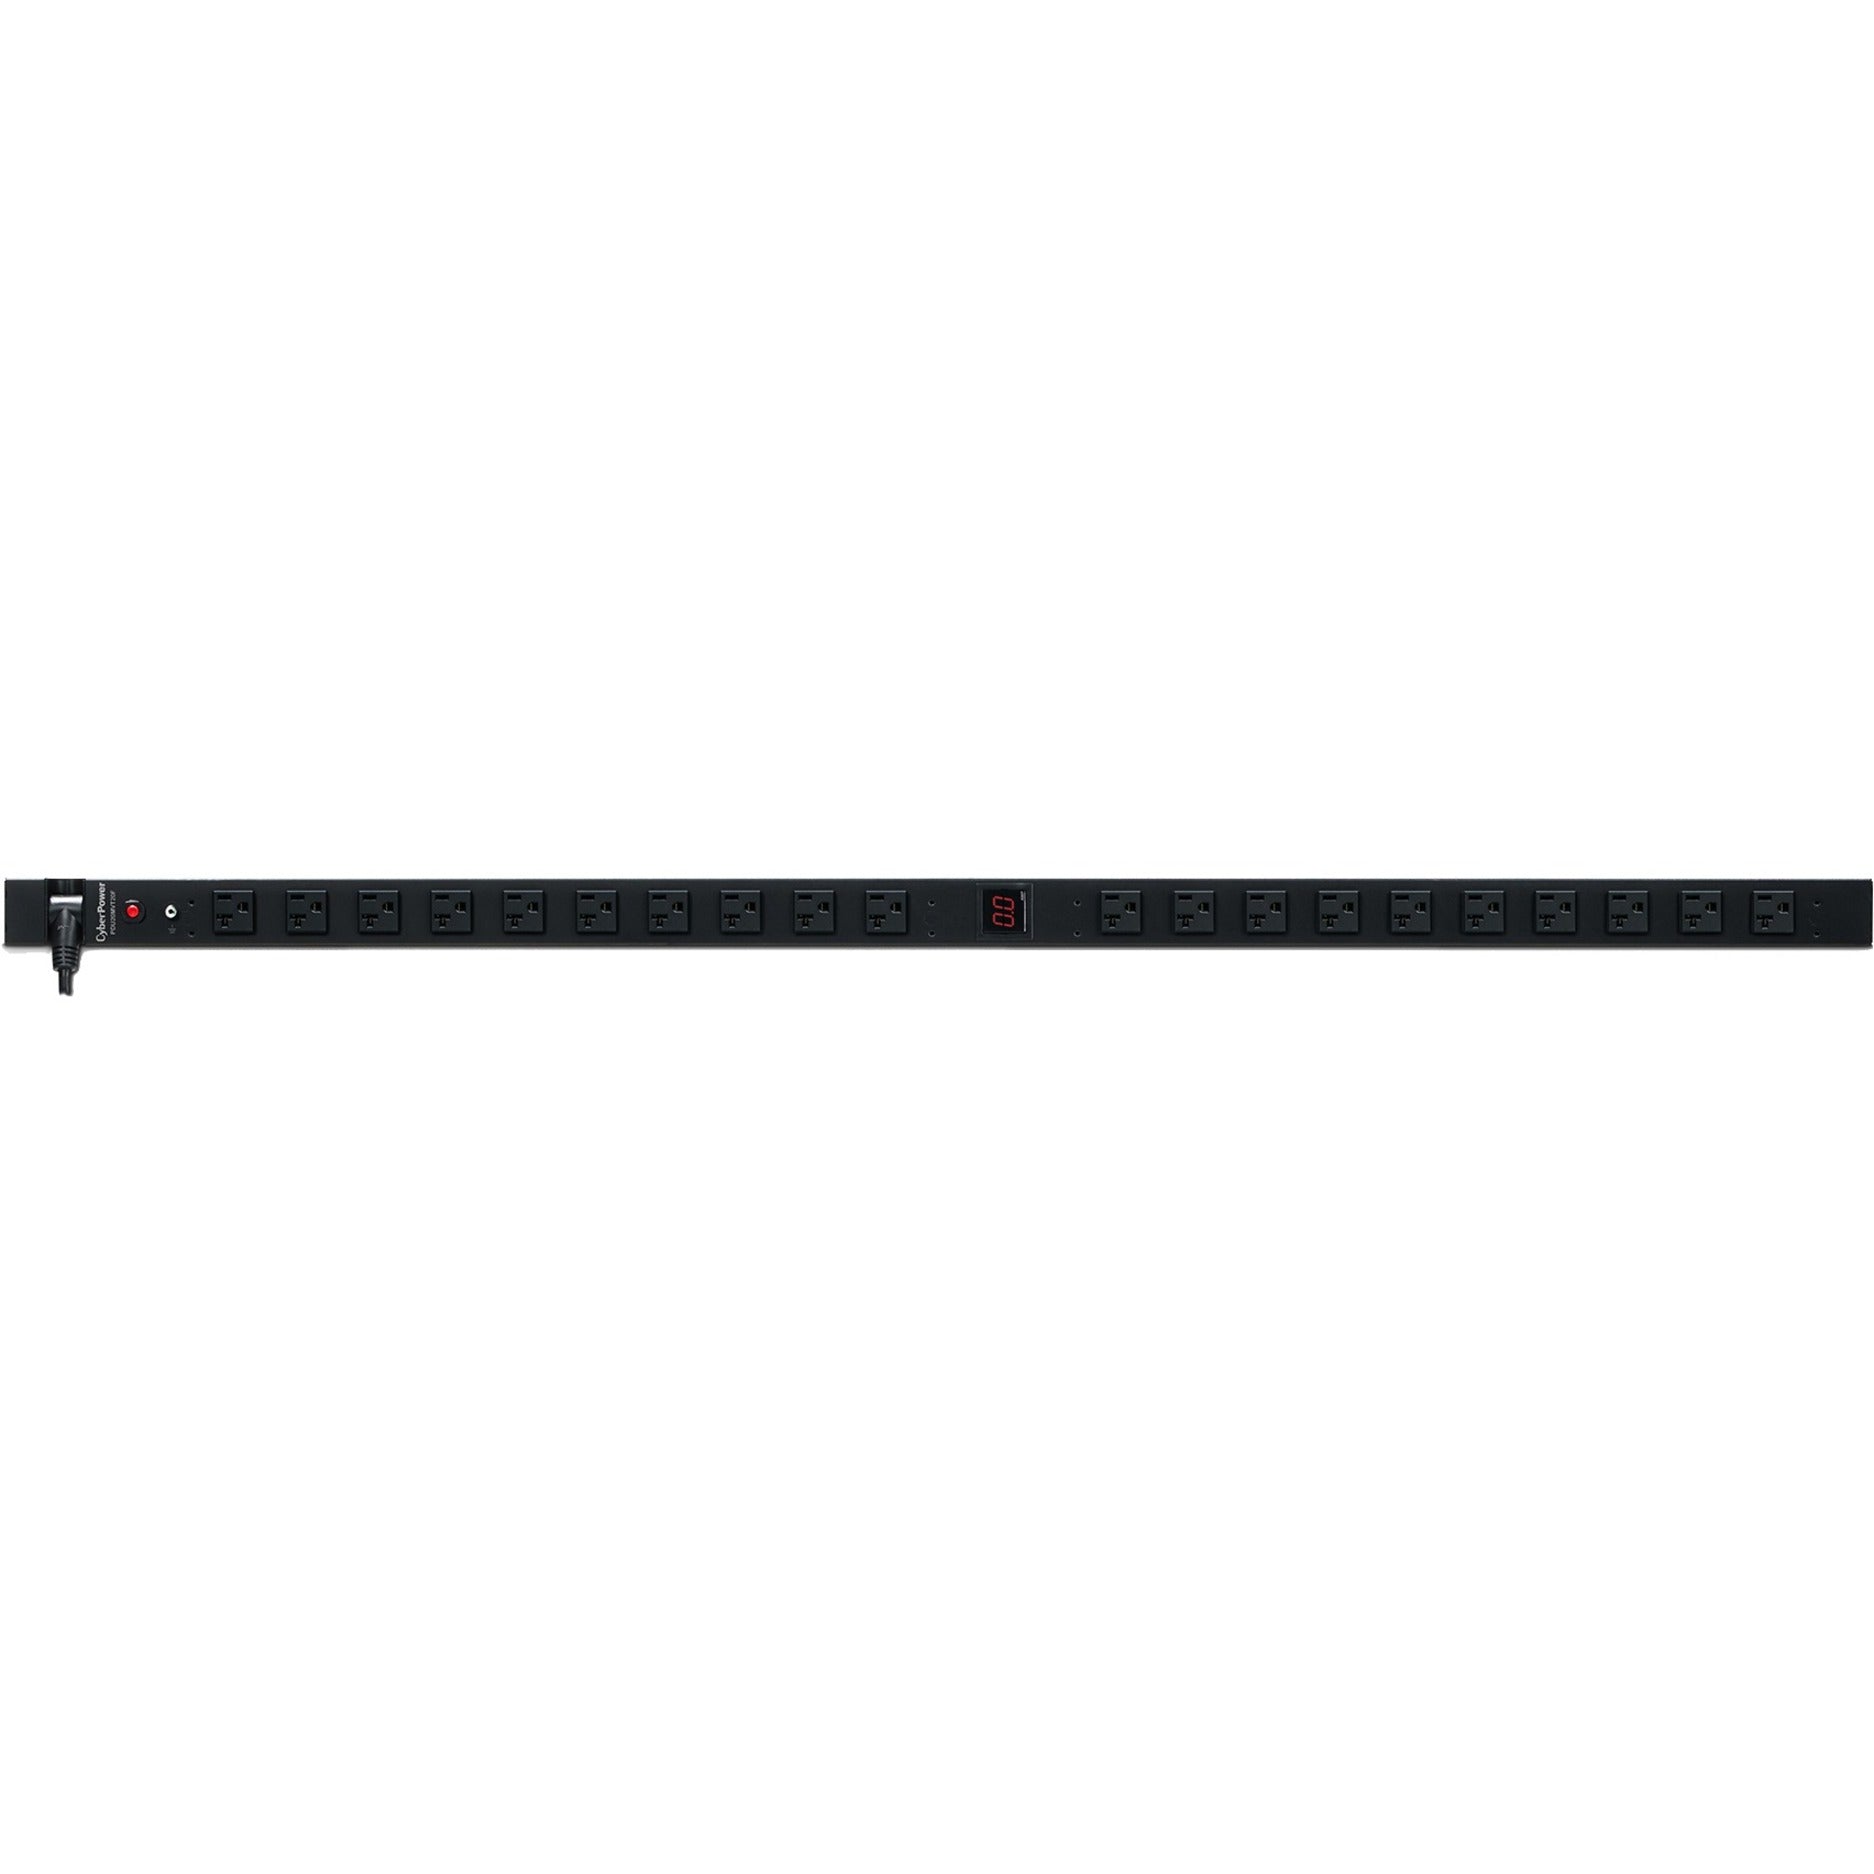 CyberPower PDU20MVT20F Metered PDU 20-Outlets 100-125V 20A Rack-mountable